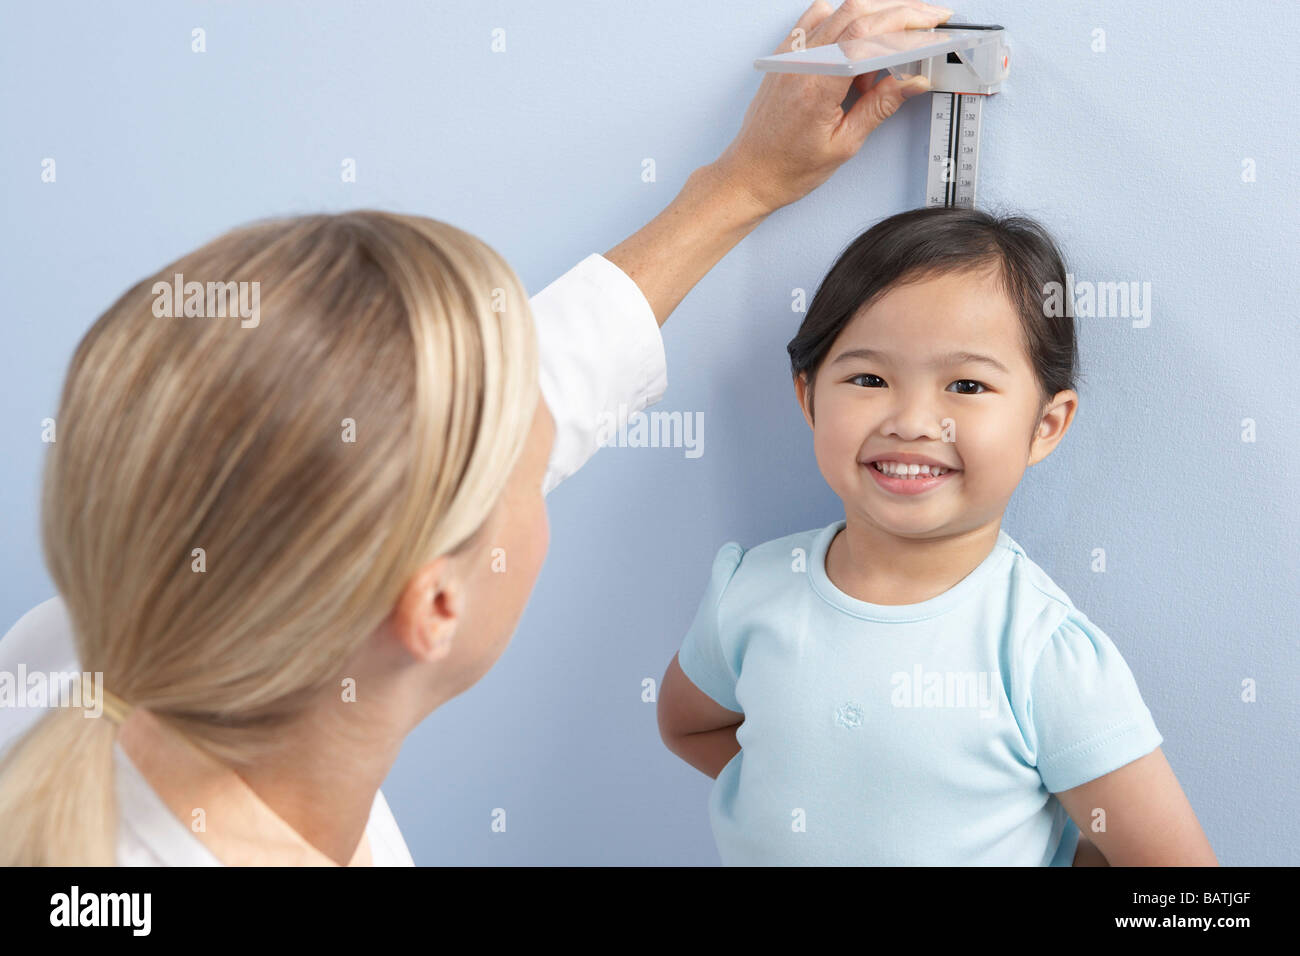 Child height measurement. Doctor measuring the height of a young girl during a check-up. Stock Photo